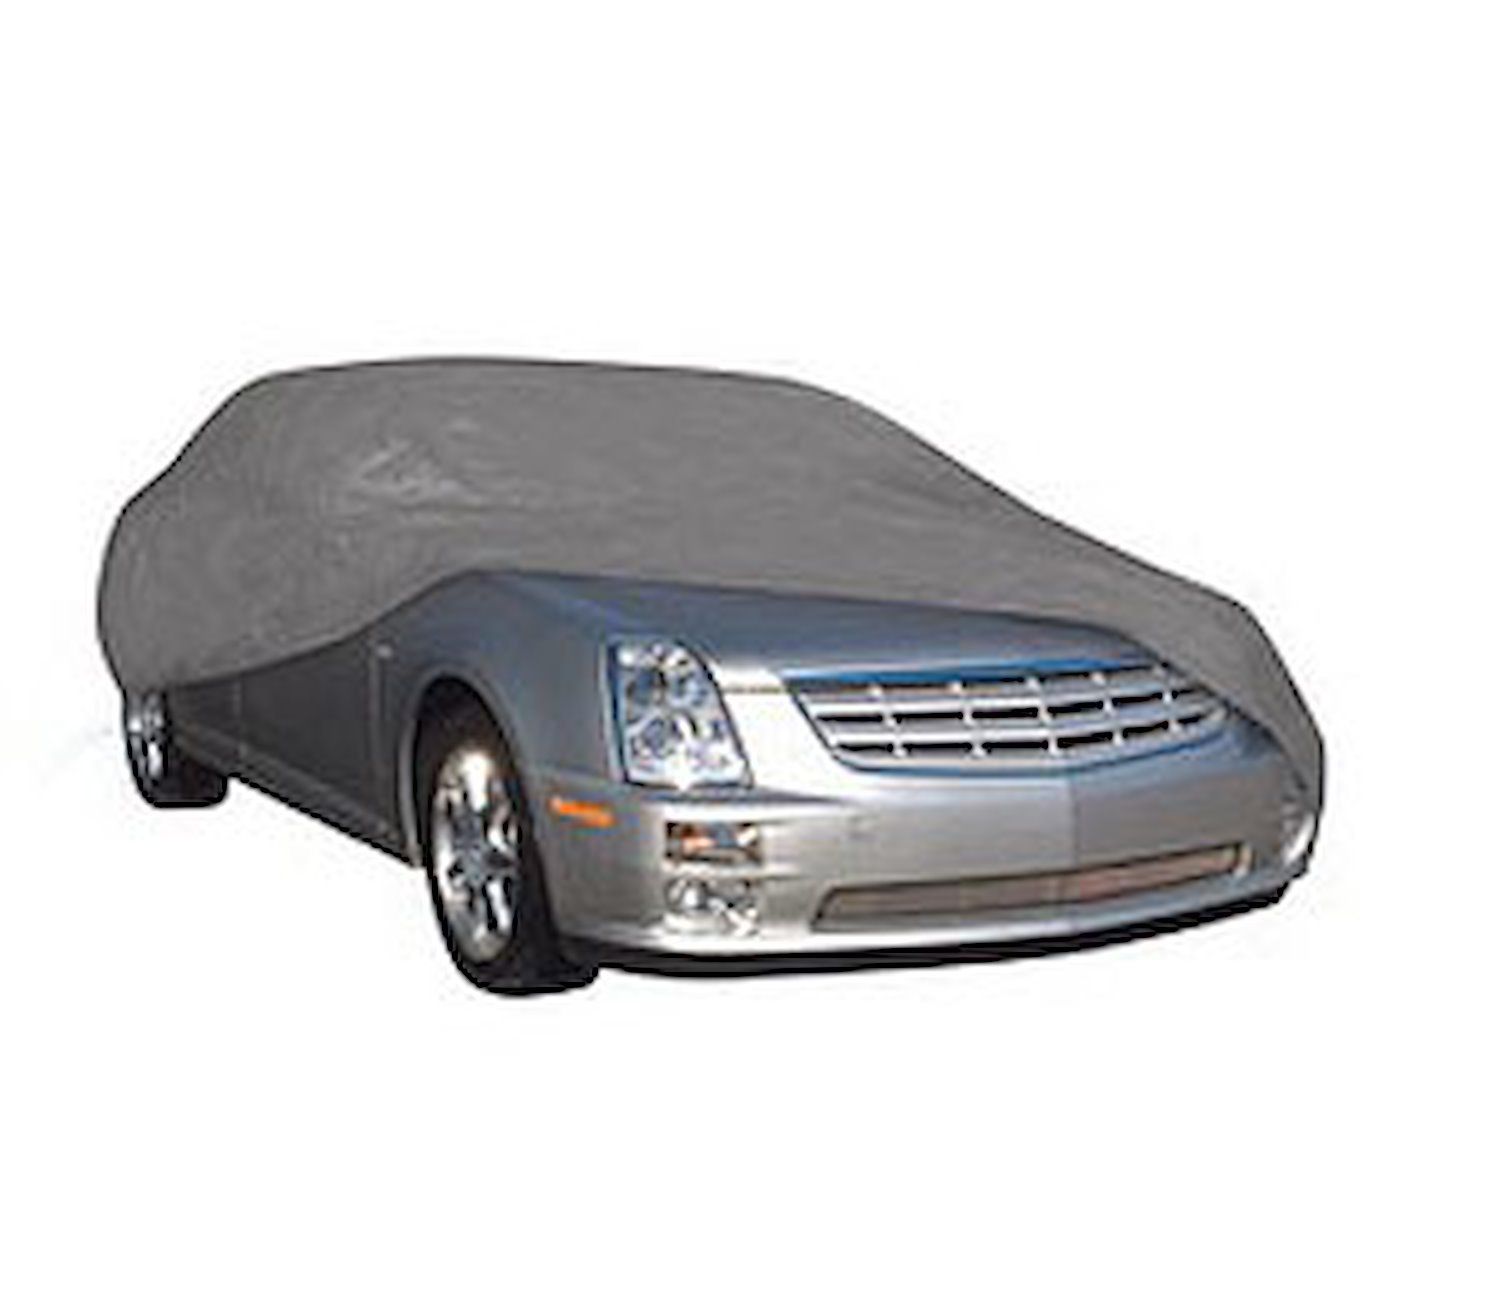 Rain Barrier Car Cover Fits Cars Up To 19" in Length